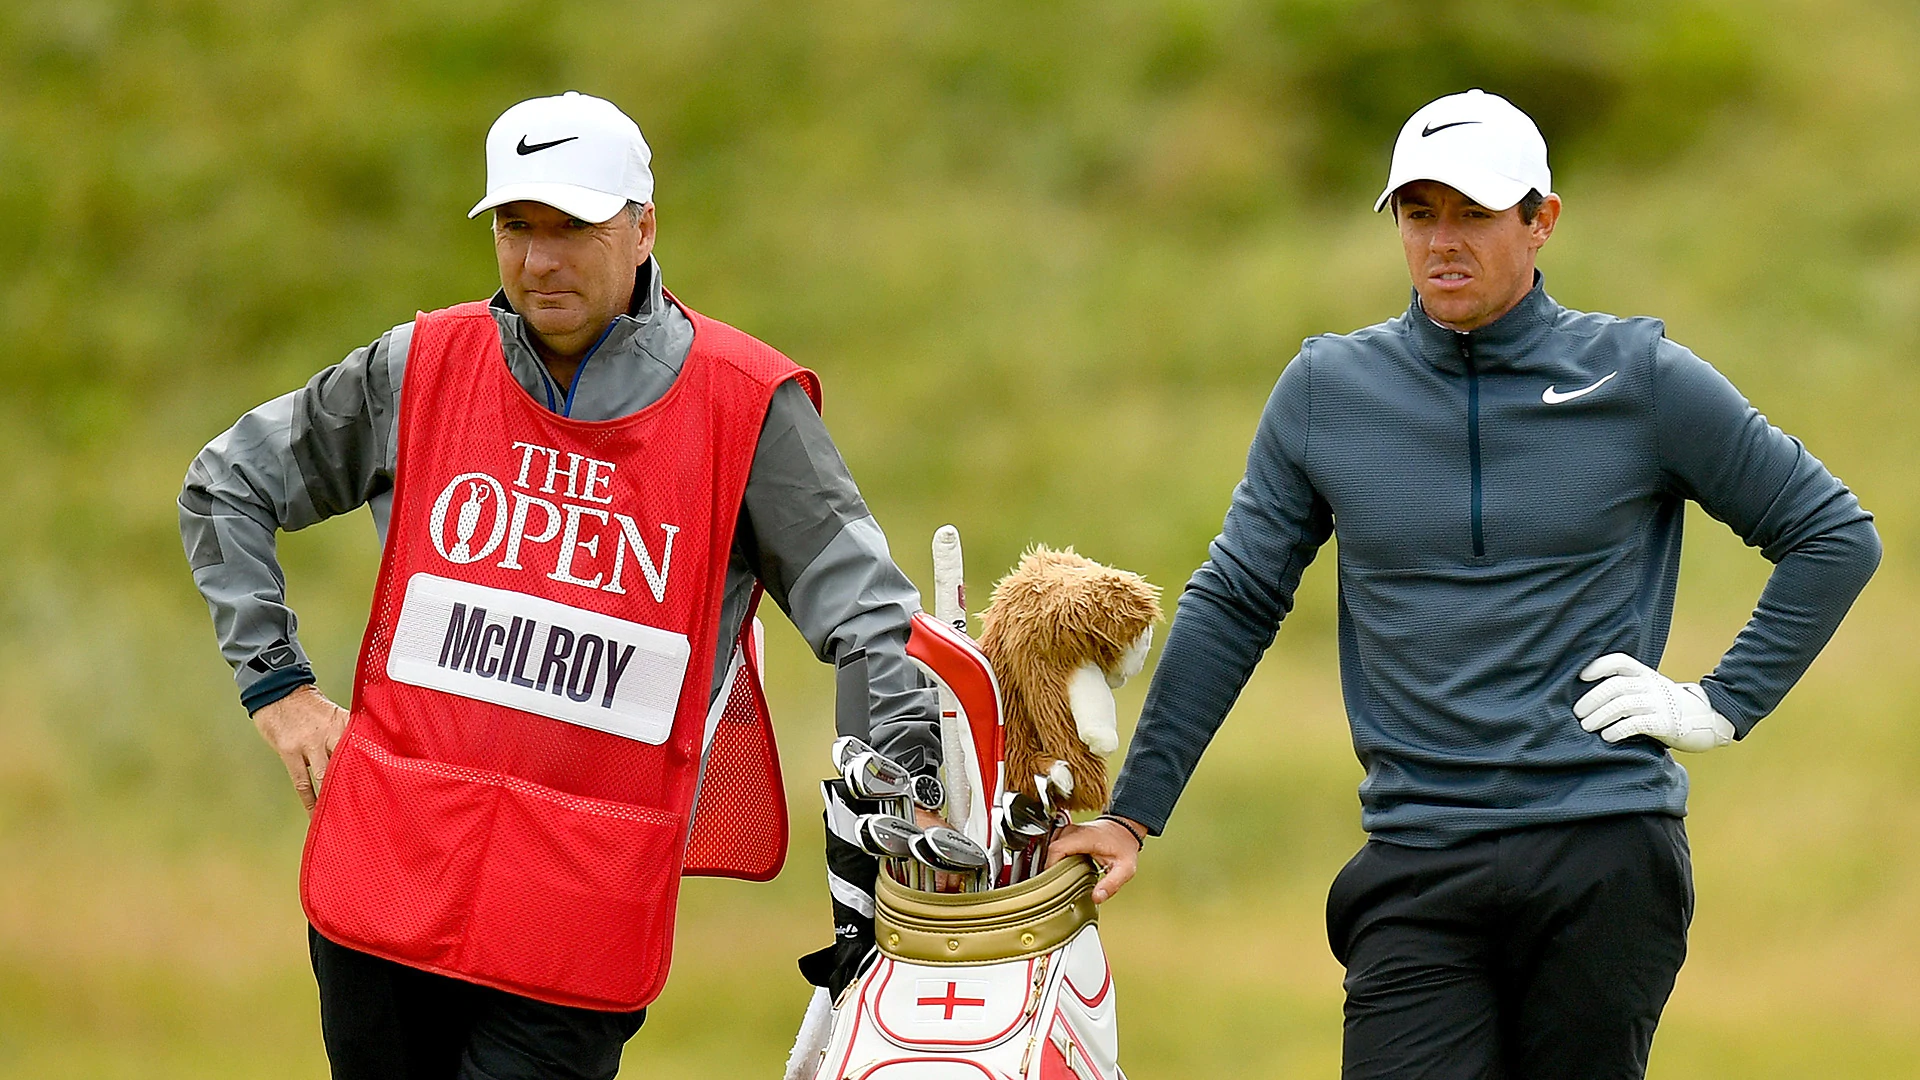 Report: McIlroy splits with longtime caddie Fitzgerald 9